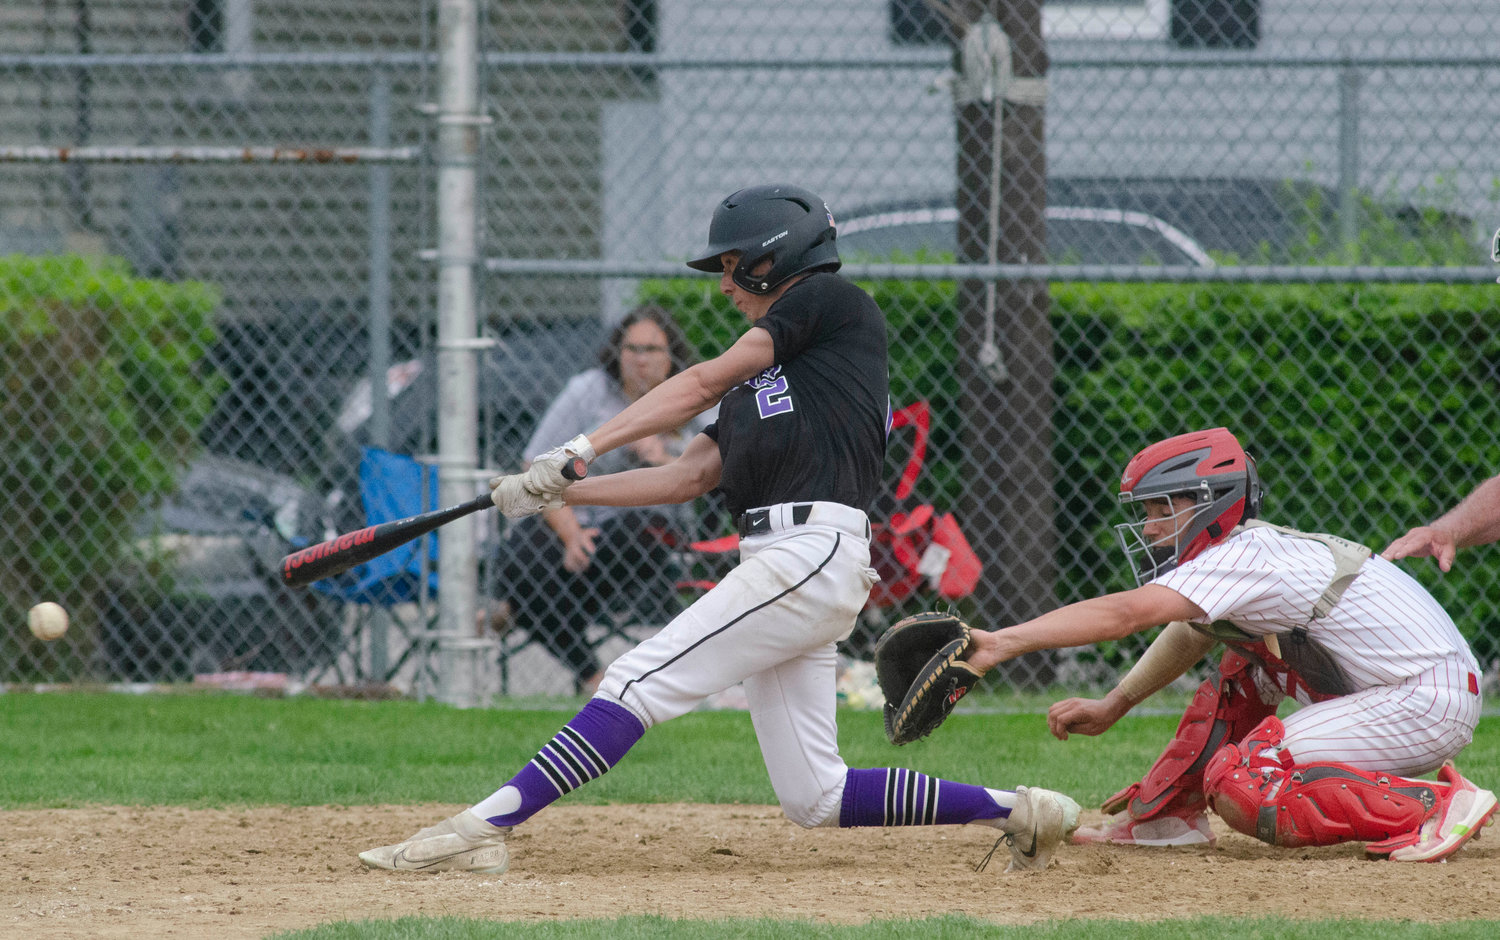 Senior centerfielder Aidan Ramaglia places a ground ball base hit into centerfield to plate to Huskies runs and give Mt. Hope a 10-9 victory over East Providence.